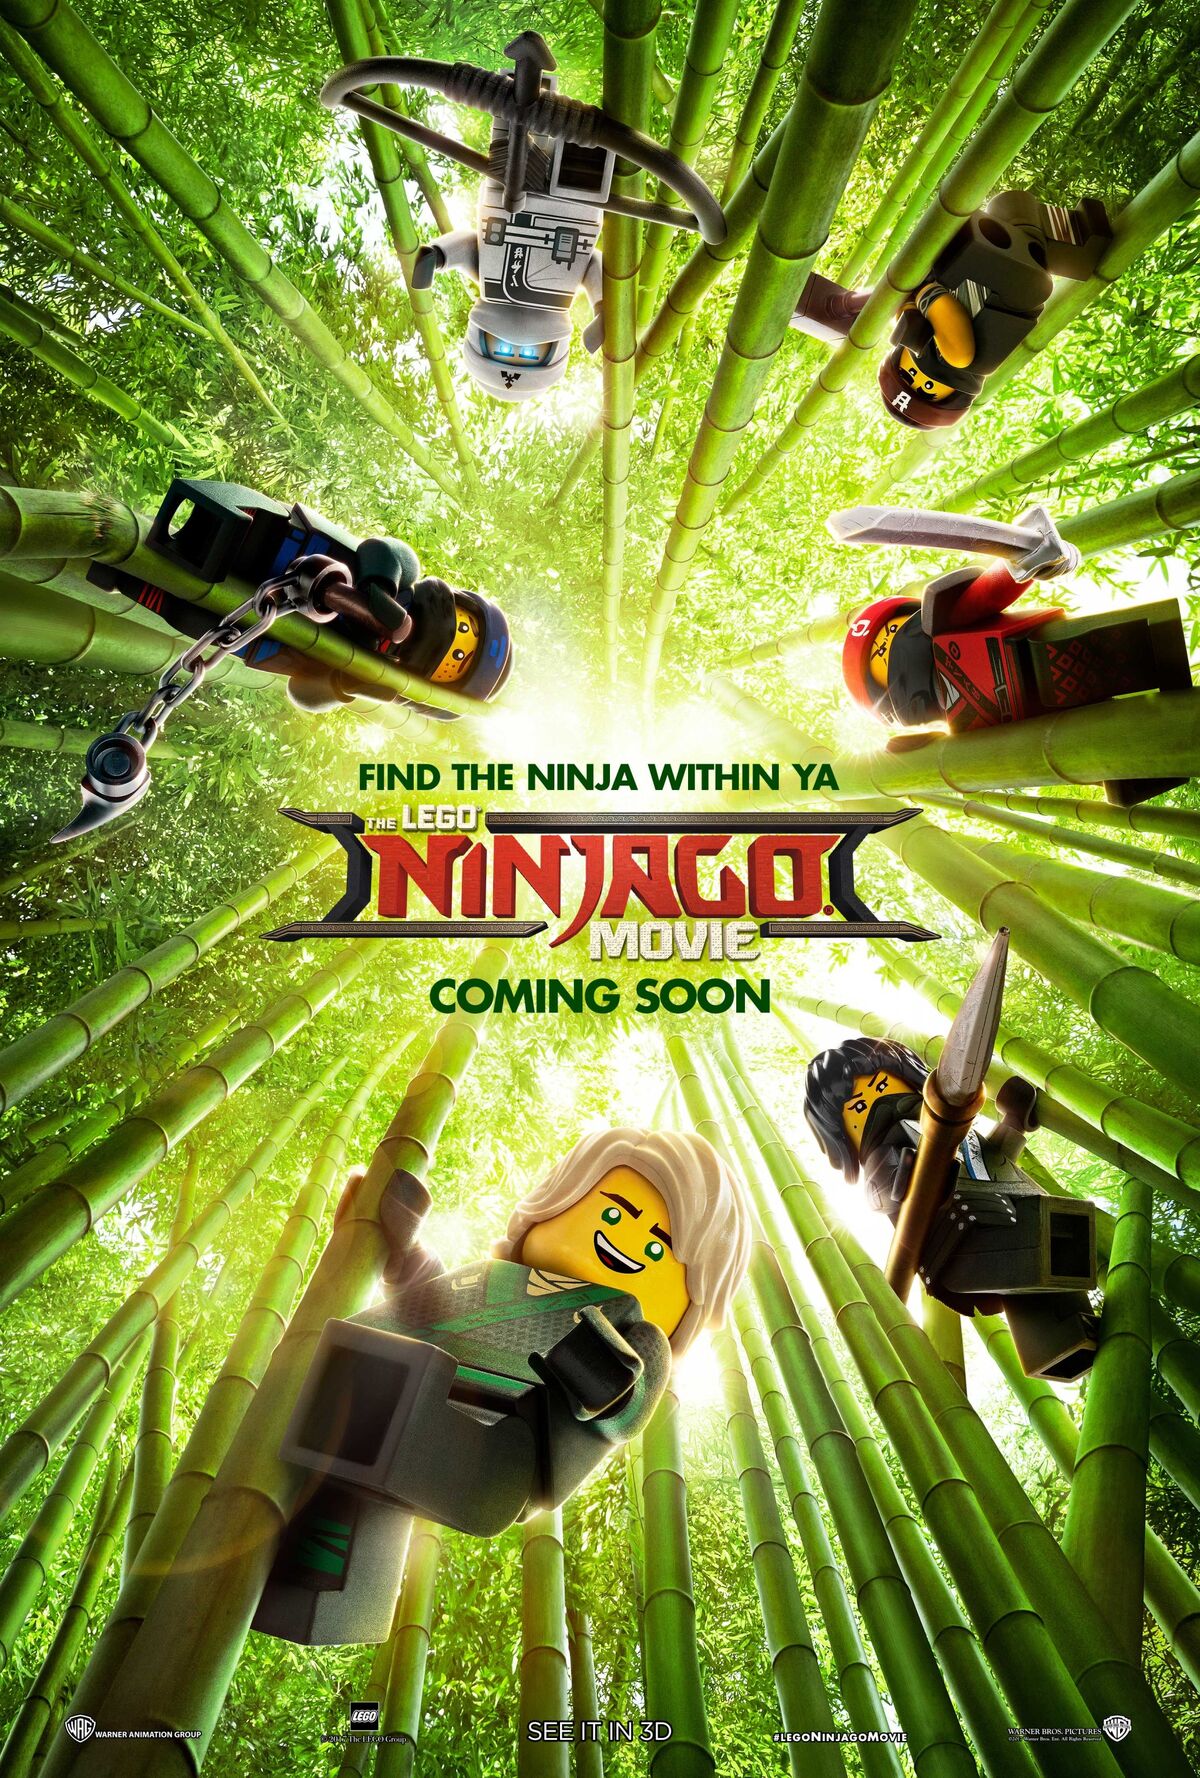 https://static.wikia.nocookie.net/warner-bros-entertainment/images/2/2d/The_Lego_Ninjago_Movie_poster.jpg/revision/latest/scale-to-width-down/1200?cb=20220815122638